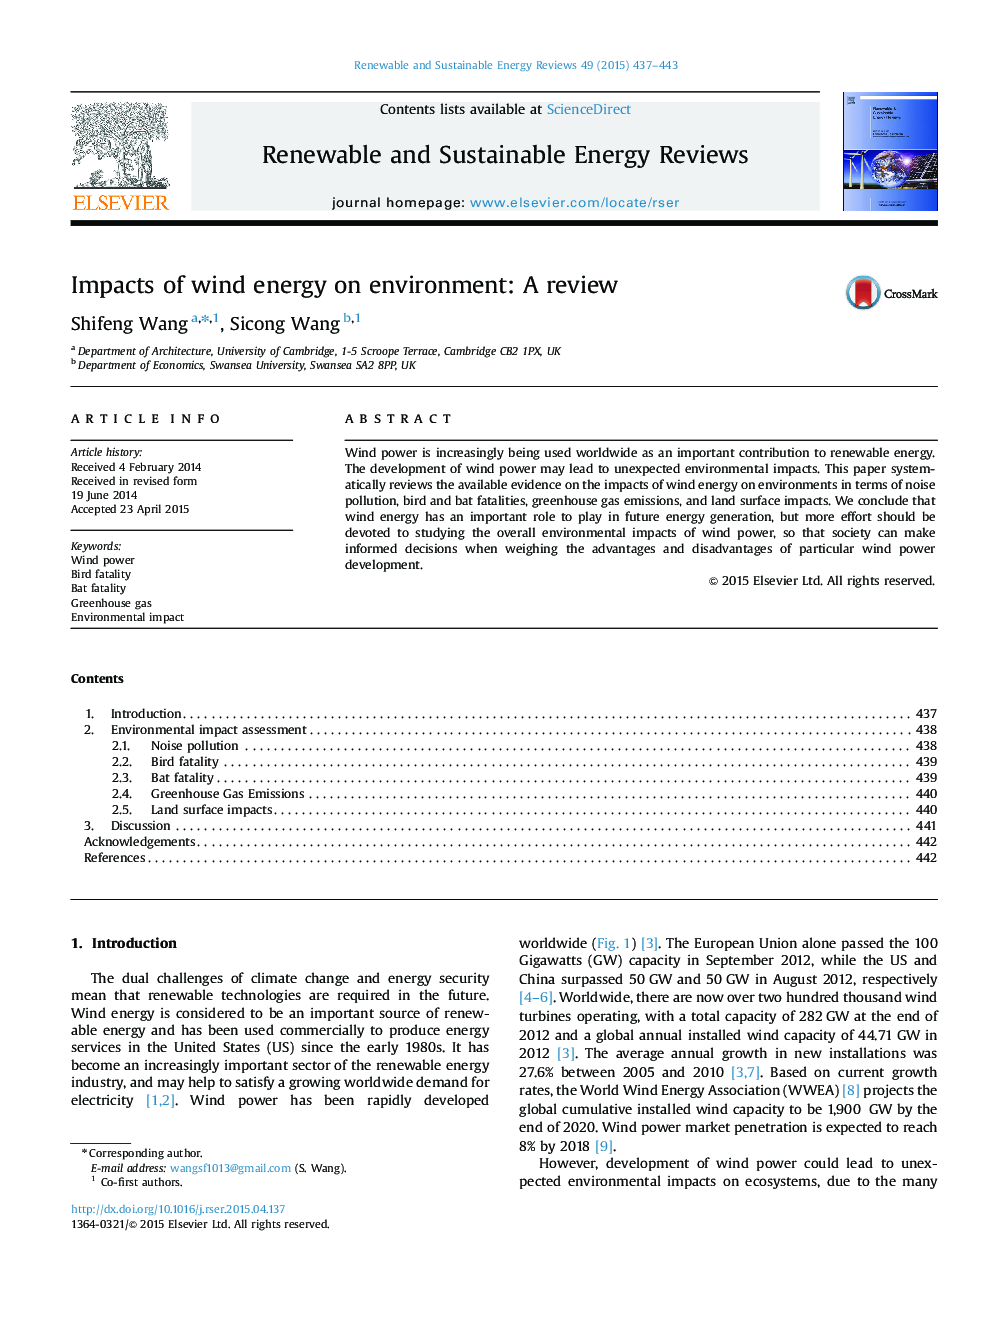 Impacts of wind energy on environment: A review